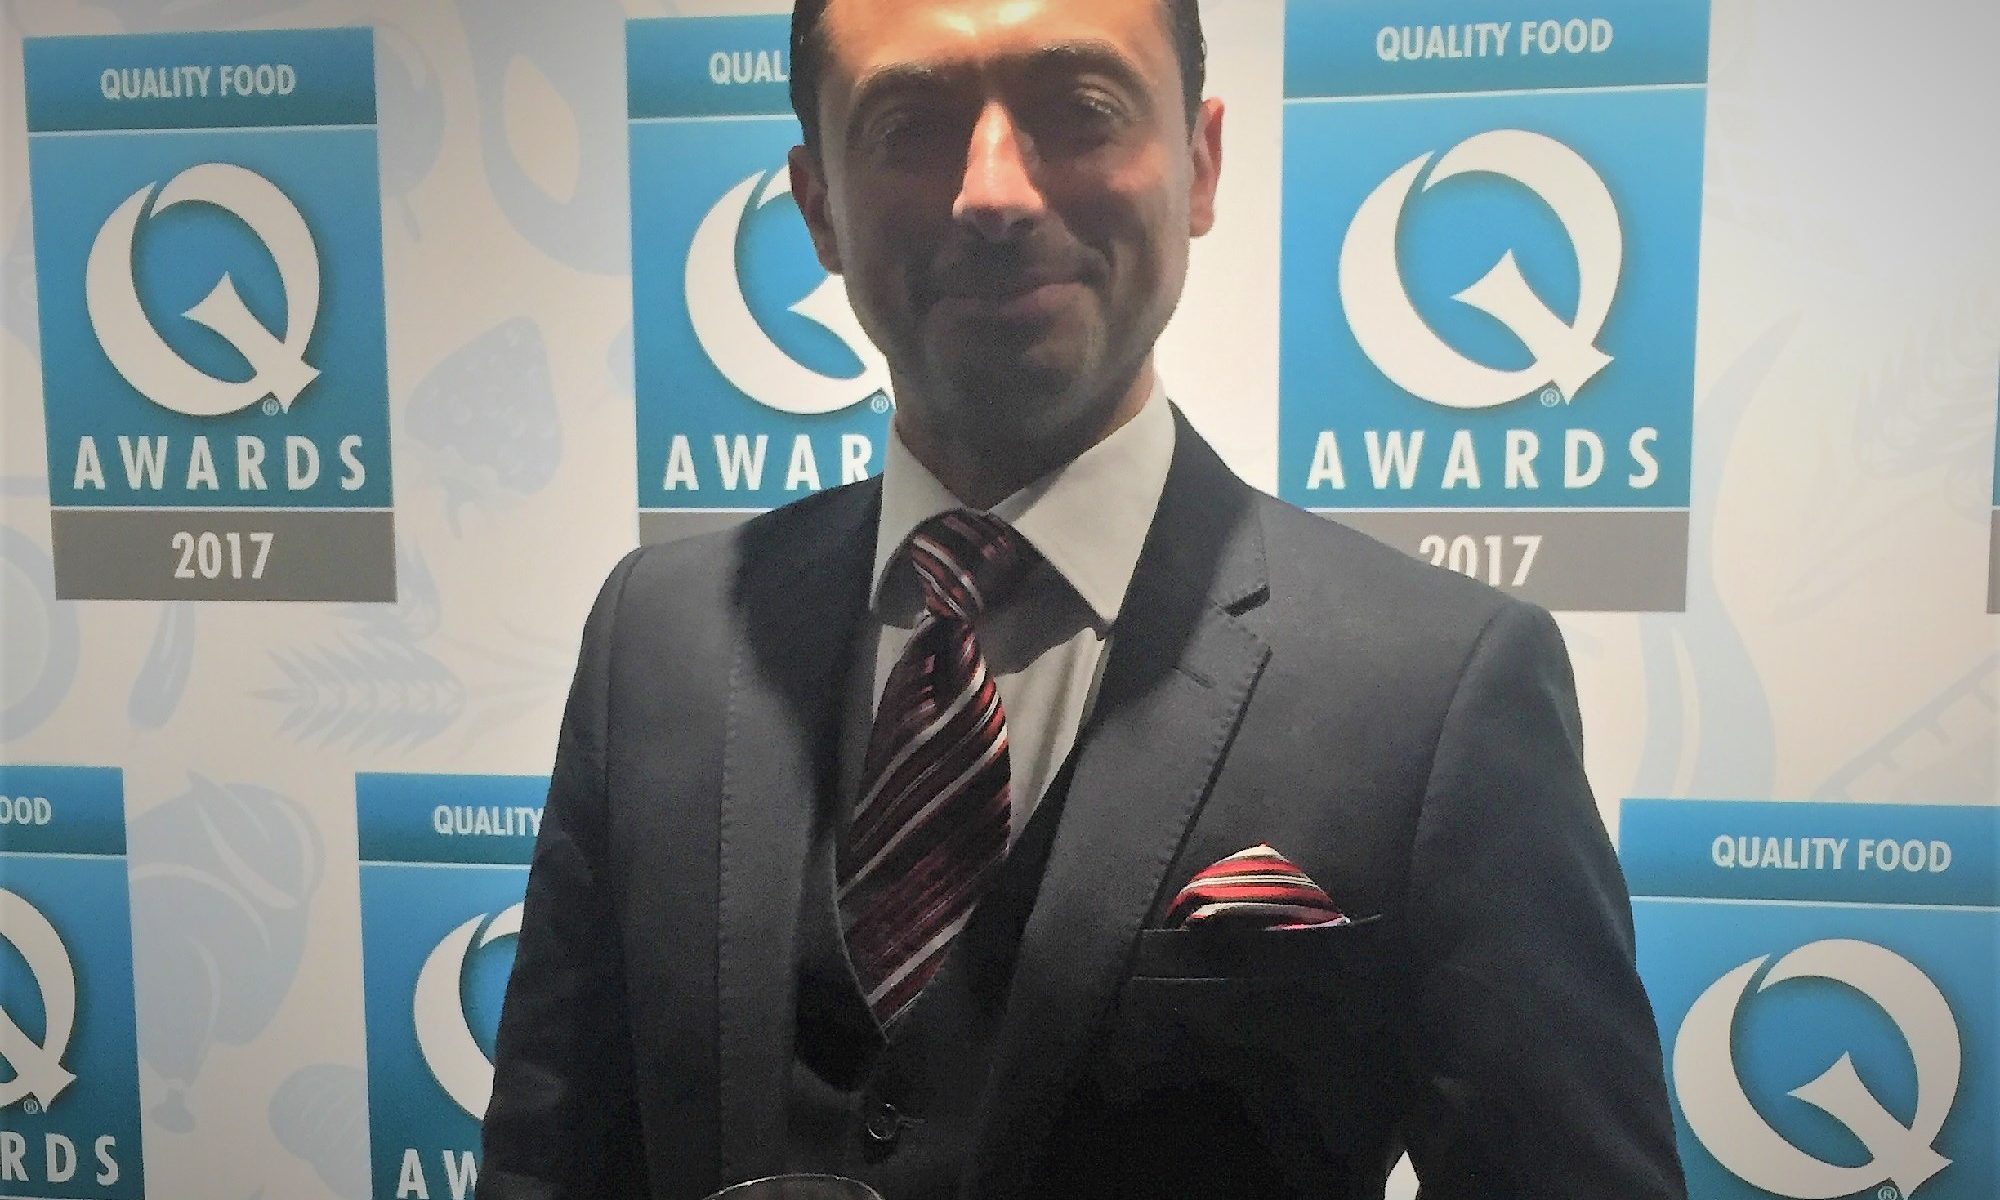 Theo Michaels Quality Food Awards 2017